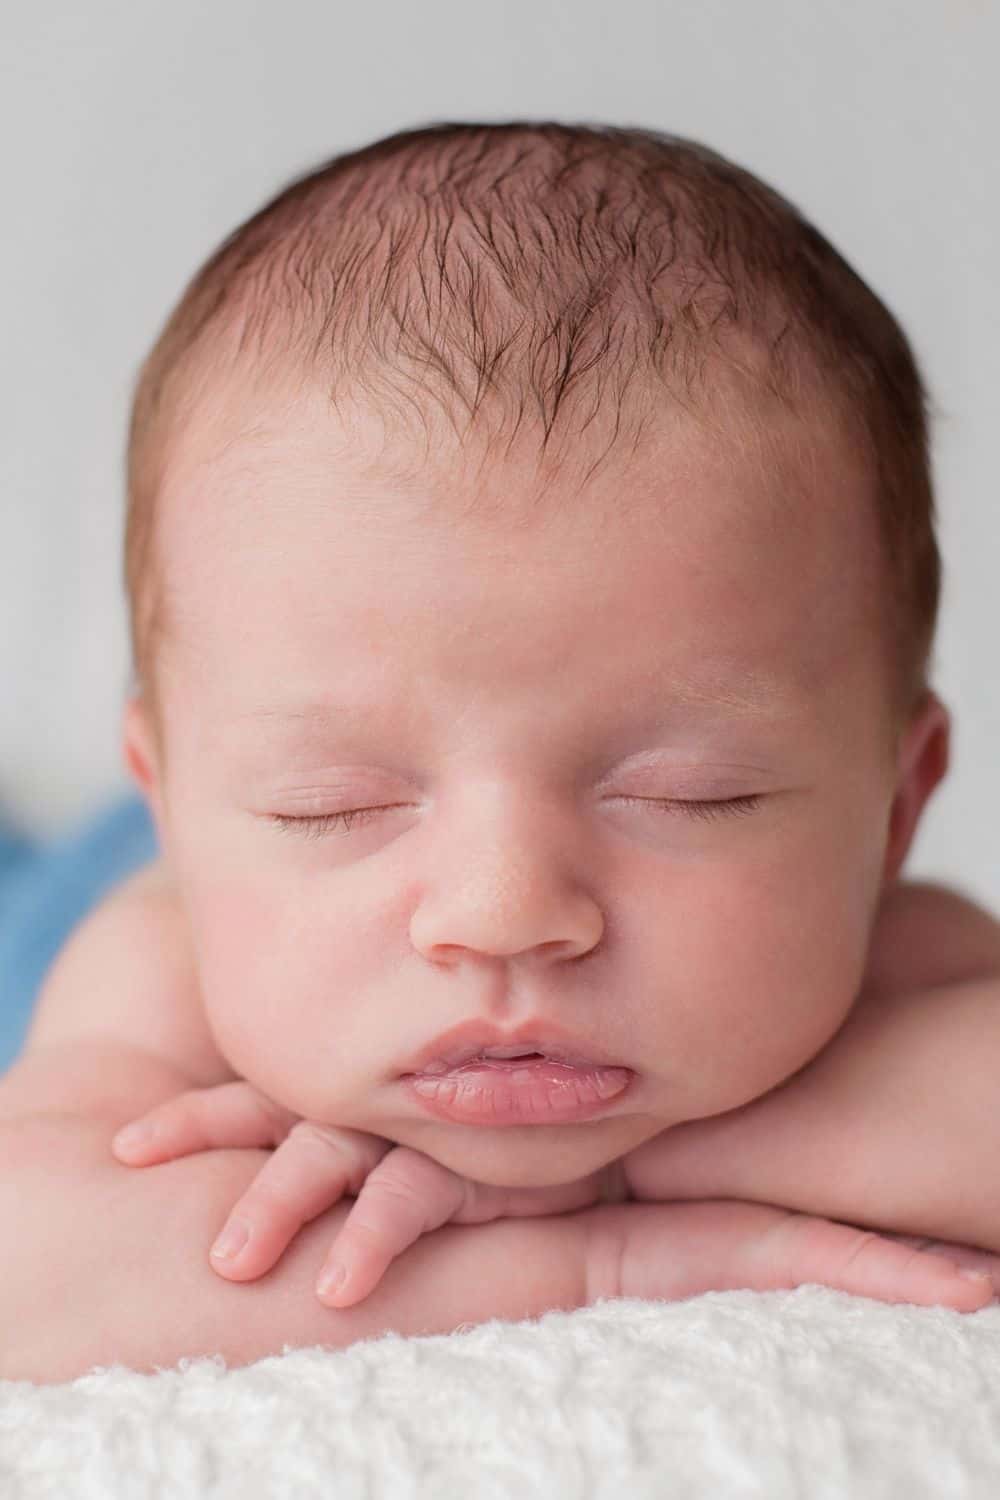 Baby boy with head resting on folded arms.